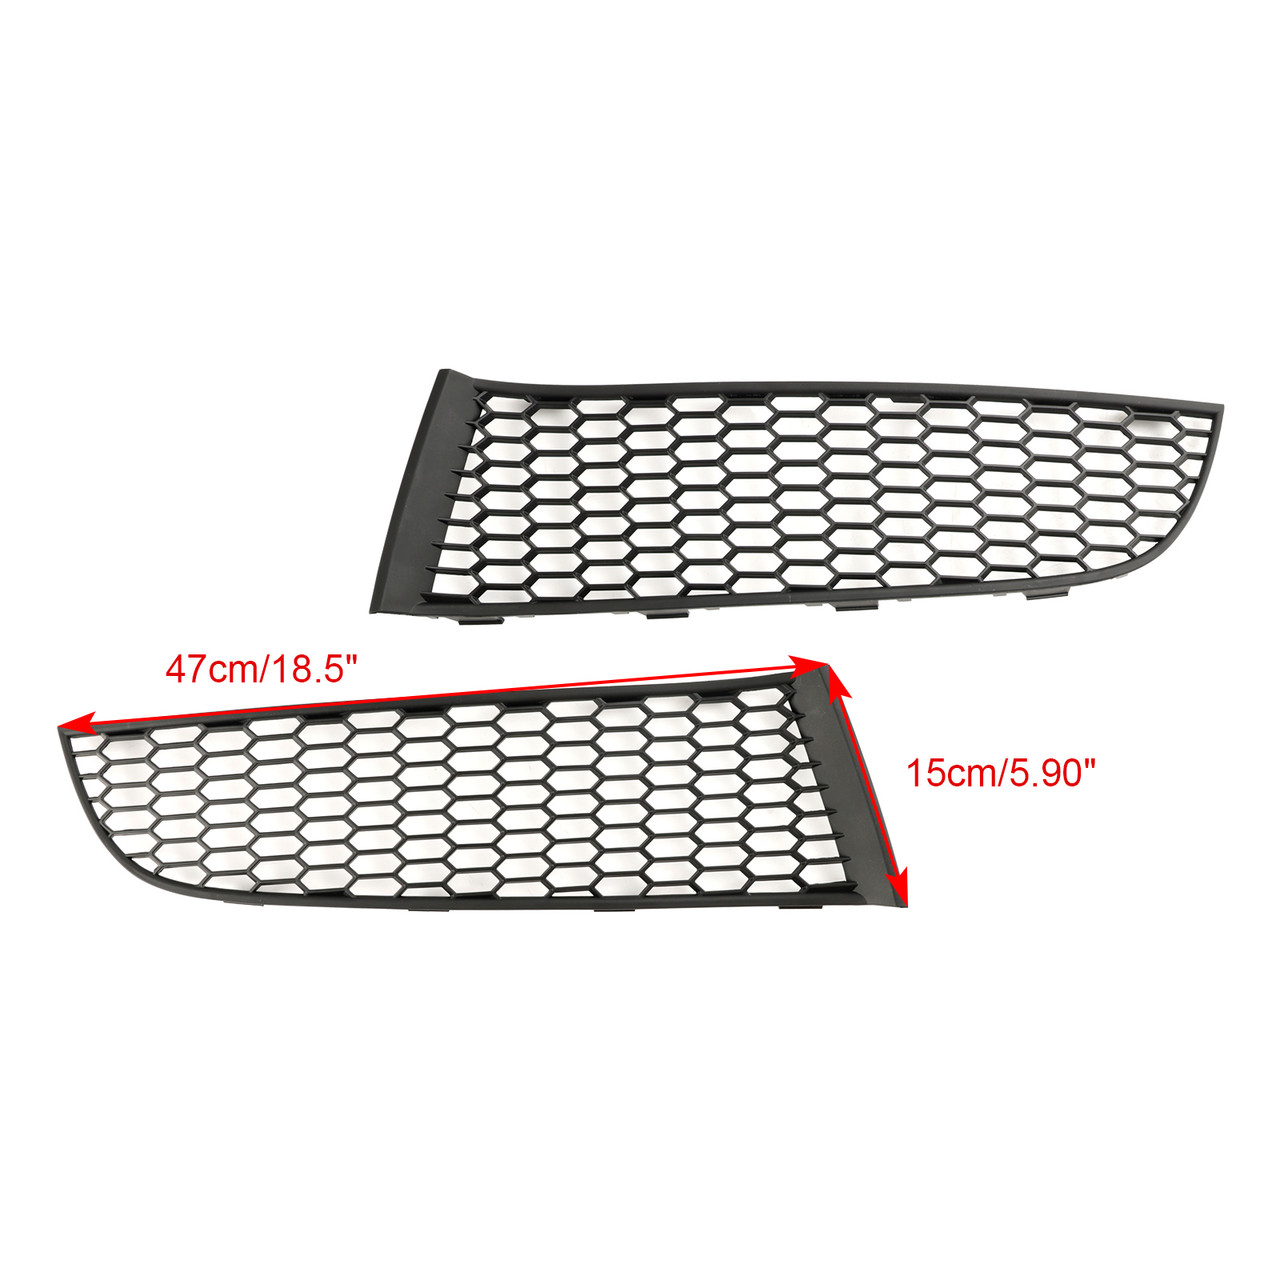 Front Bumper Lower Grille 51117903673 51117903674 Fit BMW F01 F02 2009-2015